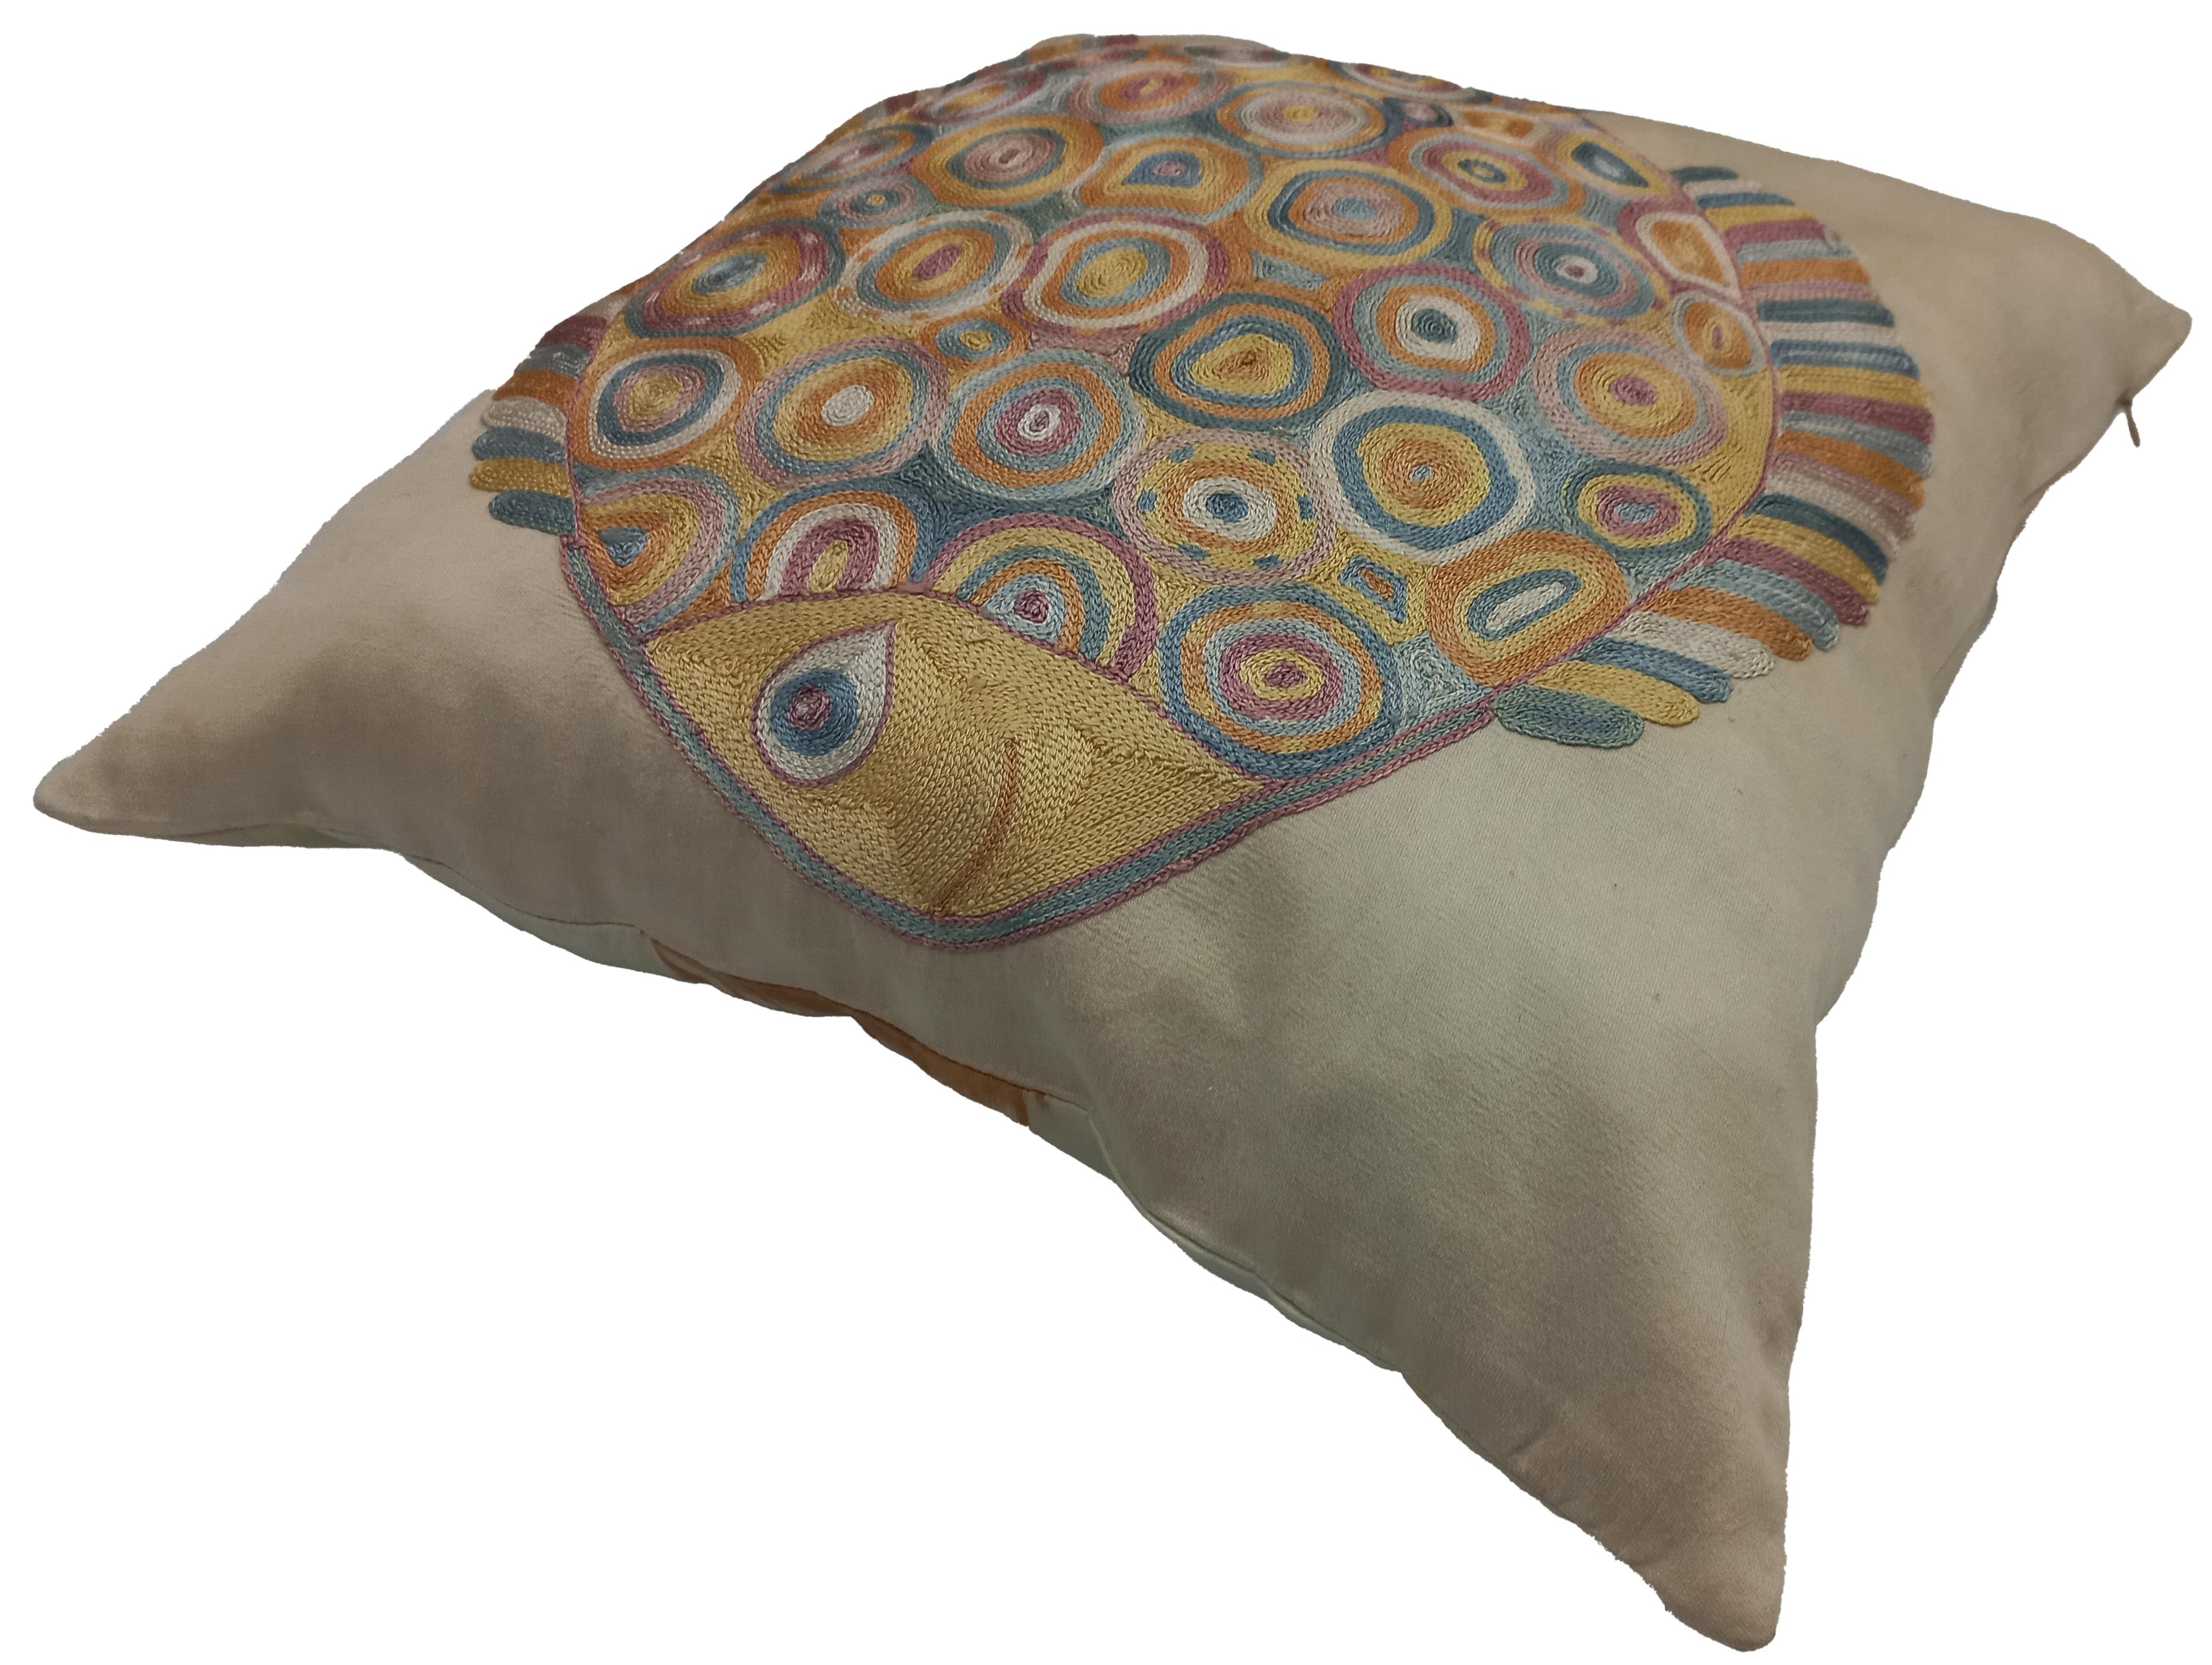 Introducing our new suzani hand embroidered silk cushion cover, a perfect addition to your home decor collection. Made from 100% silk, this throw pillow cover exudes elegance and style. The intricate embroidery work adds a touch of splendor to any